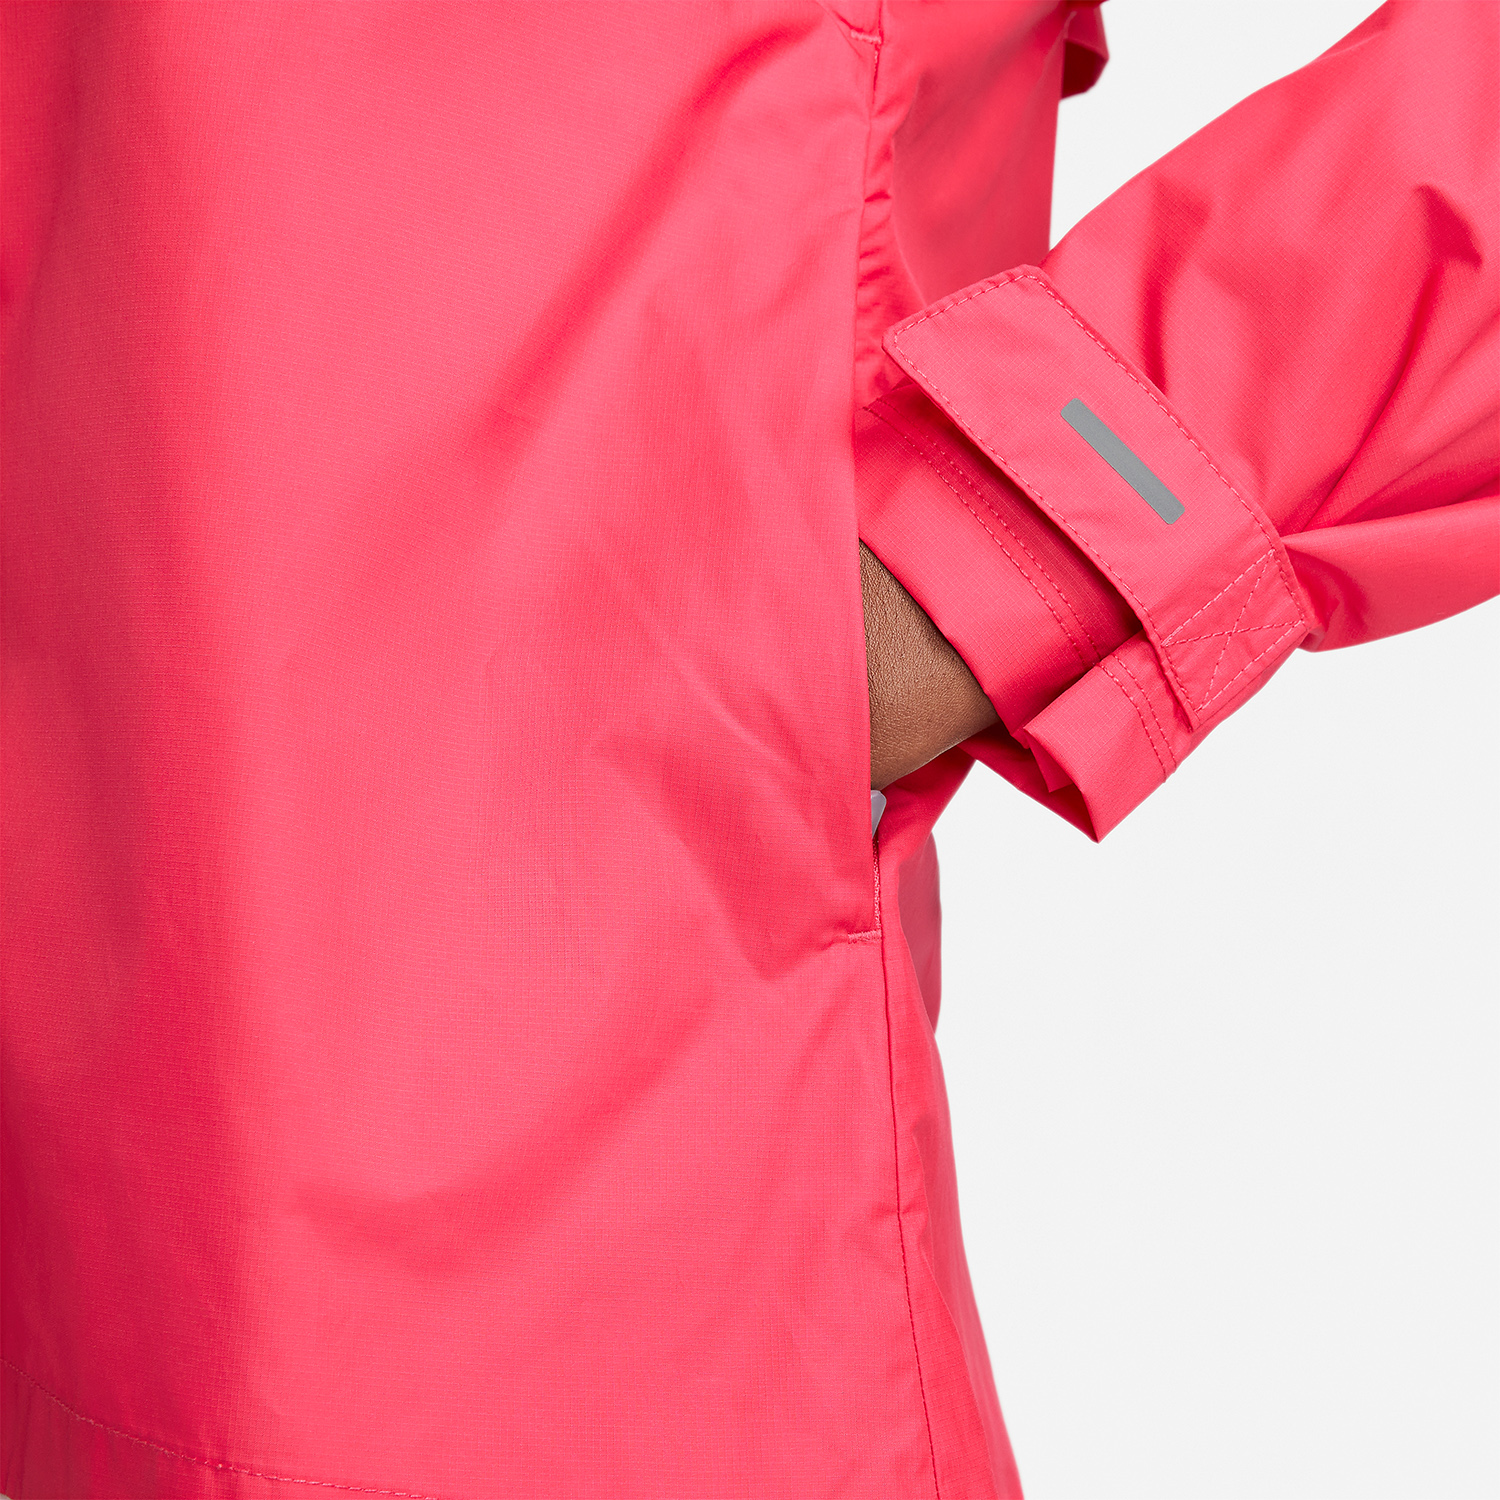 Nike Fast Repel Jacket - Light Fusion Red/Black/Reflective Silver